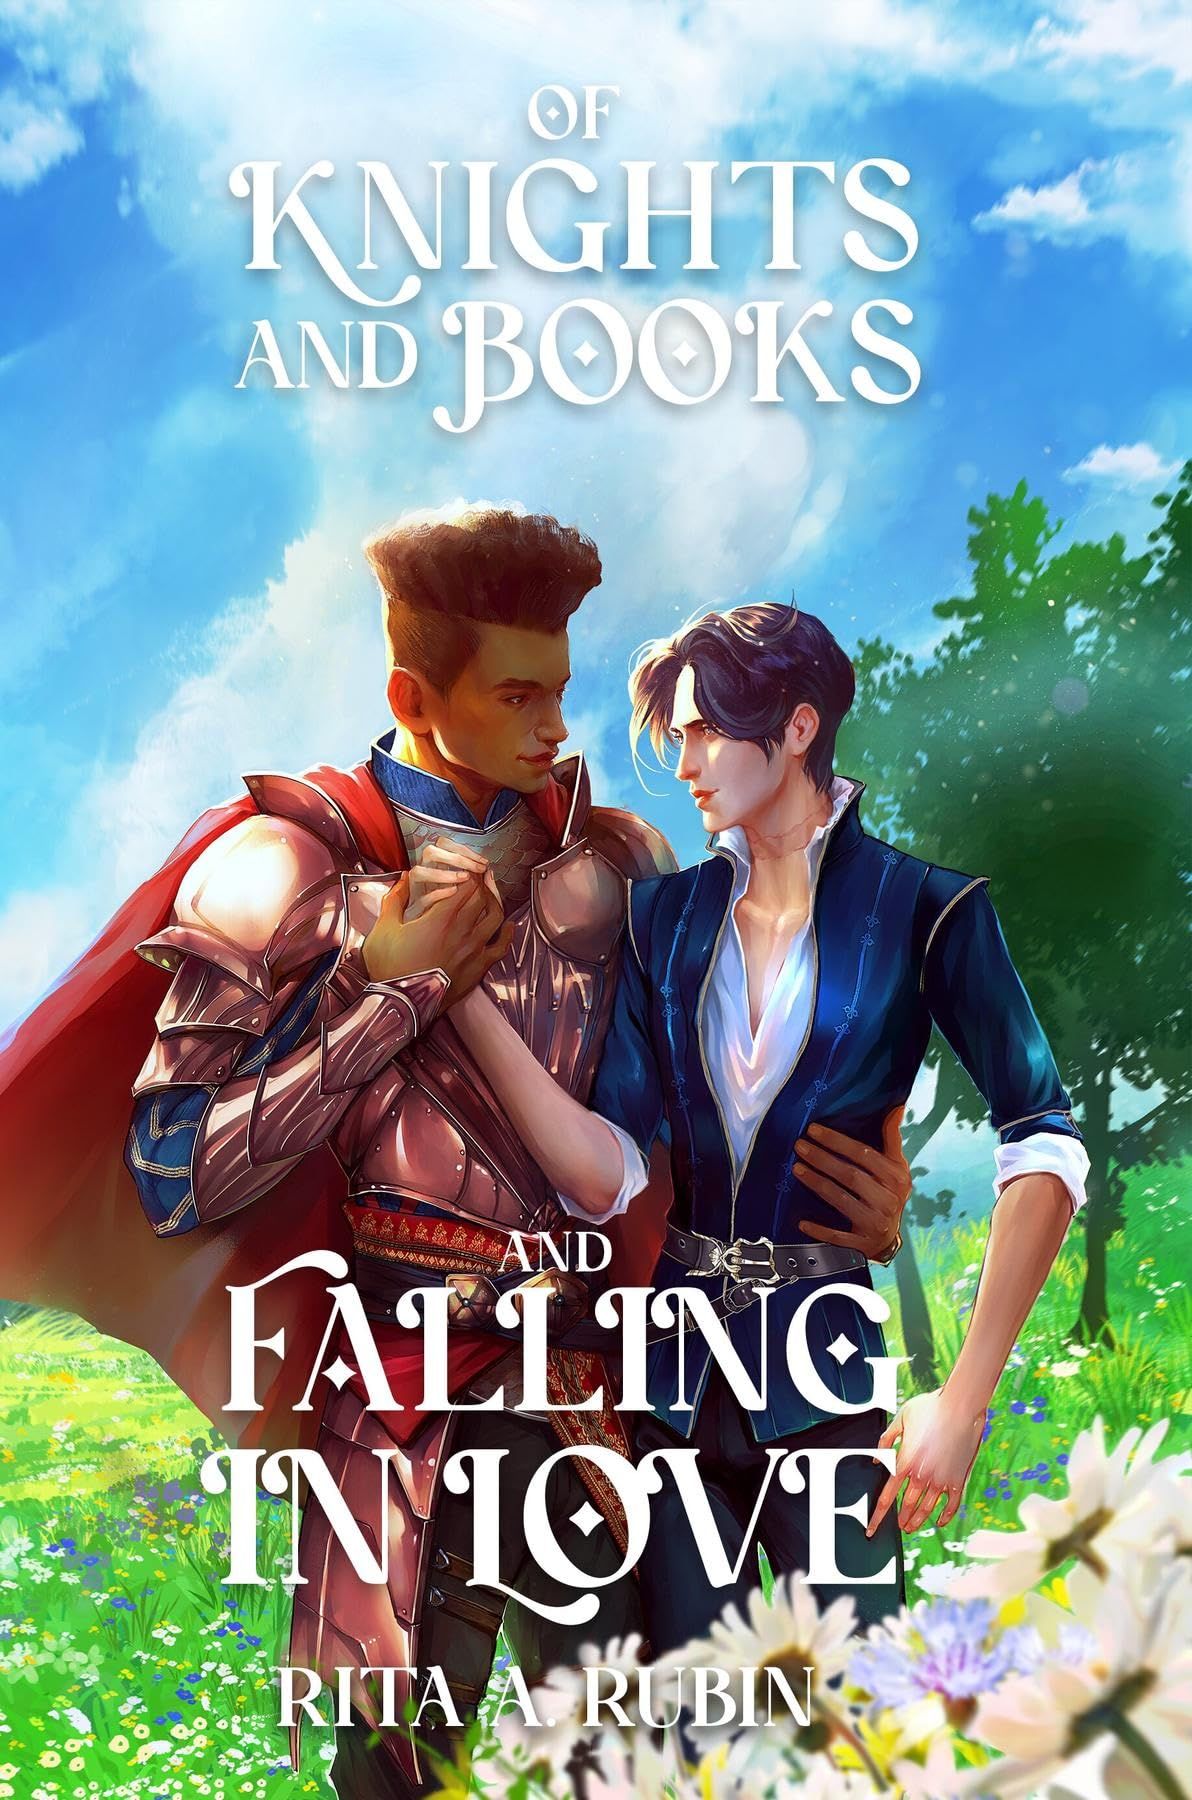 Of Knights and Books and Falling in Love book cover